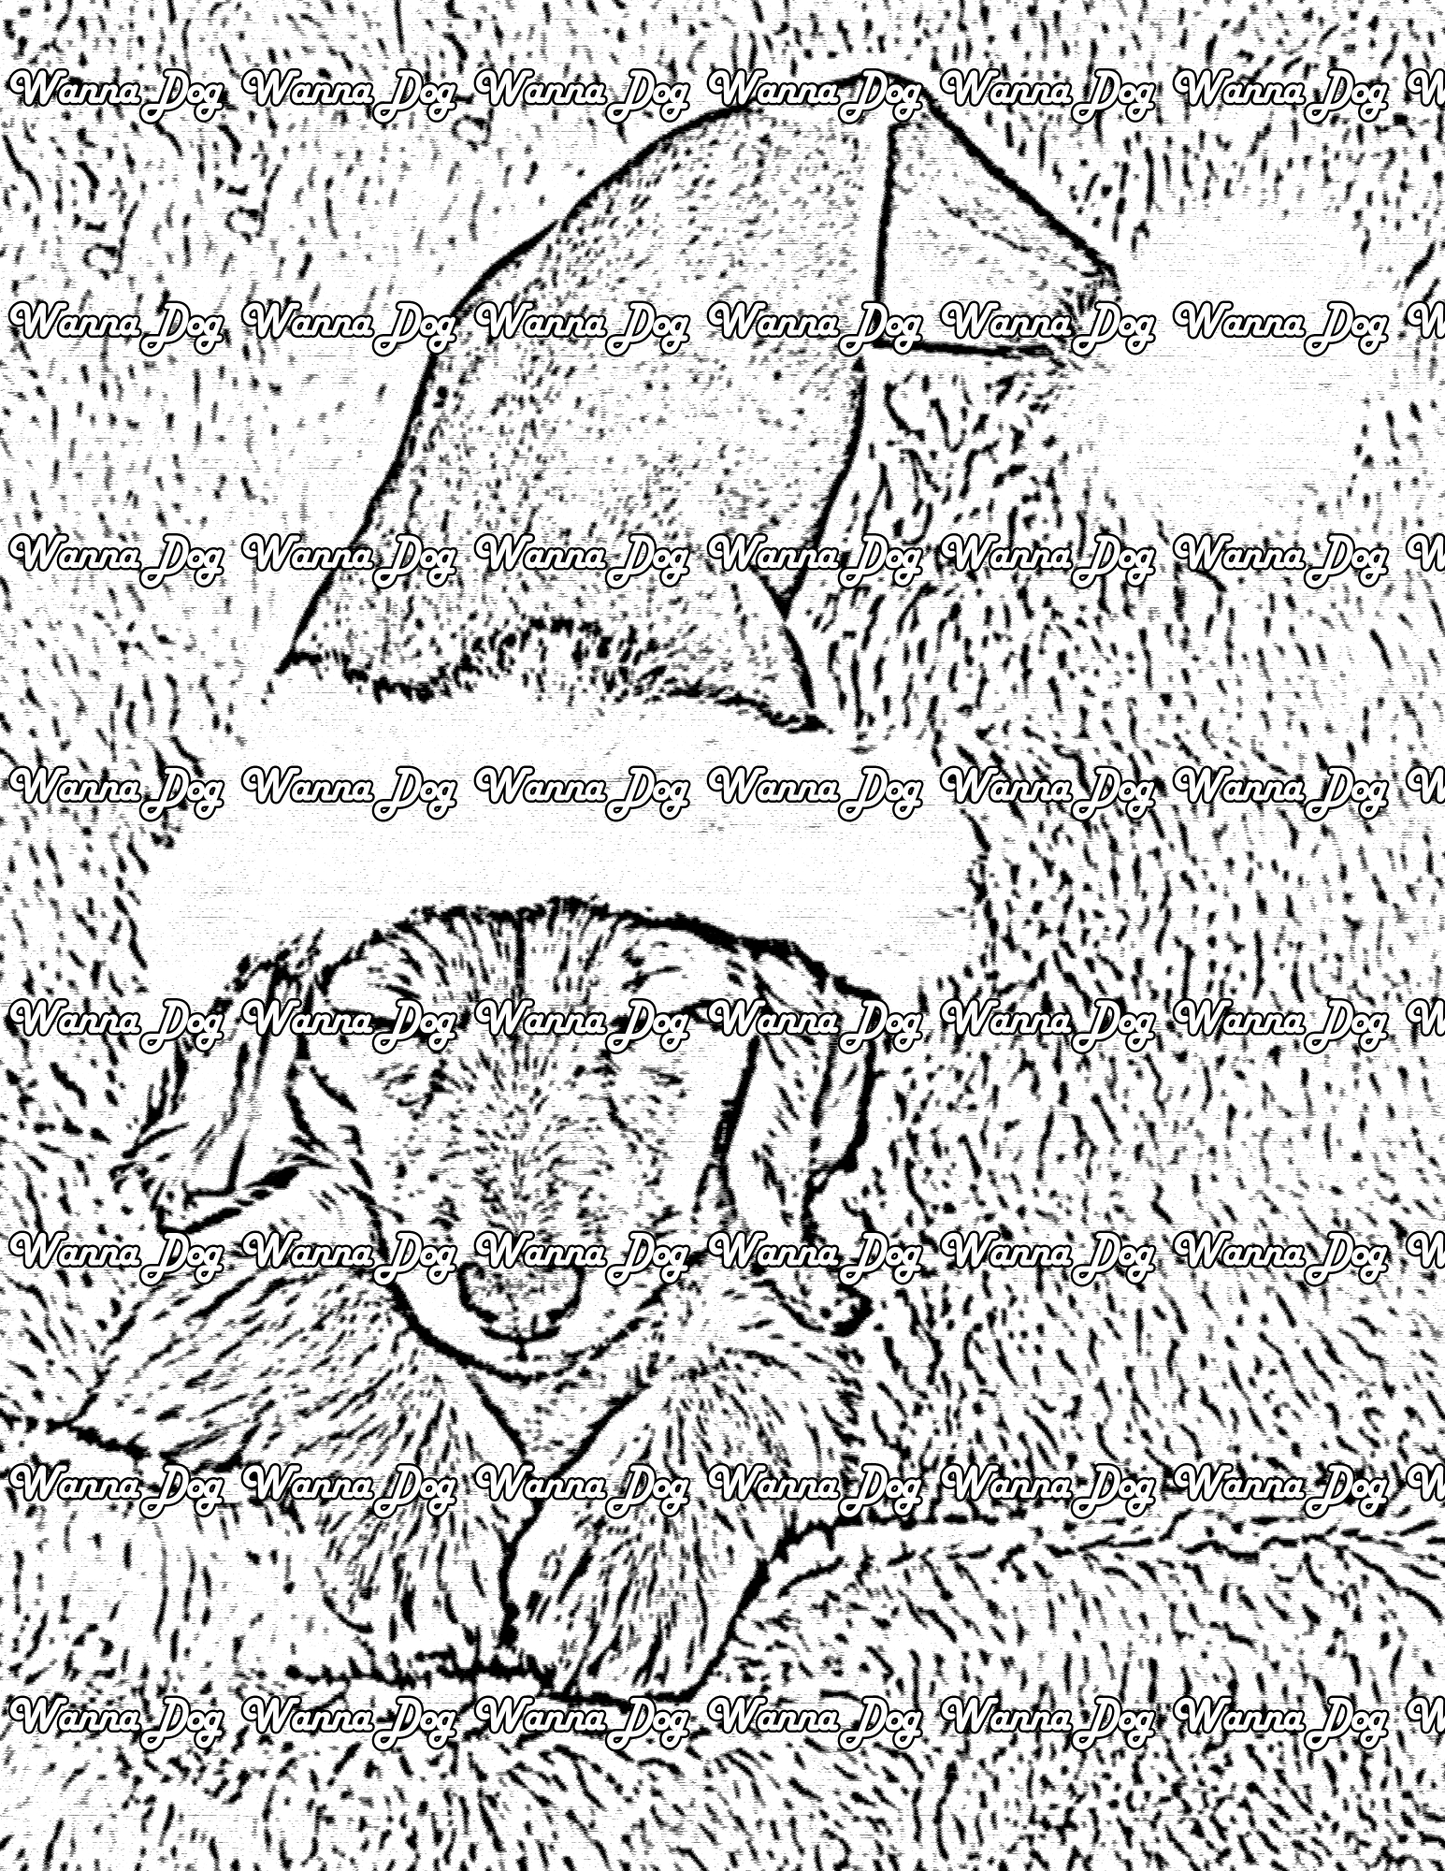 Dachshund Coloring Page of a Dachshund sleeping with a santa ha